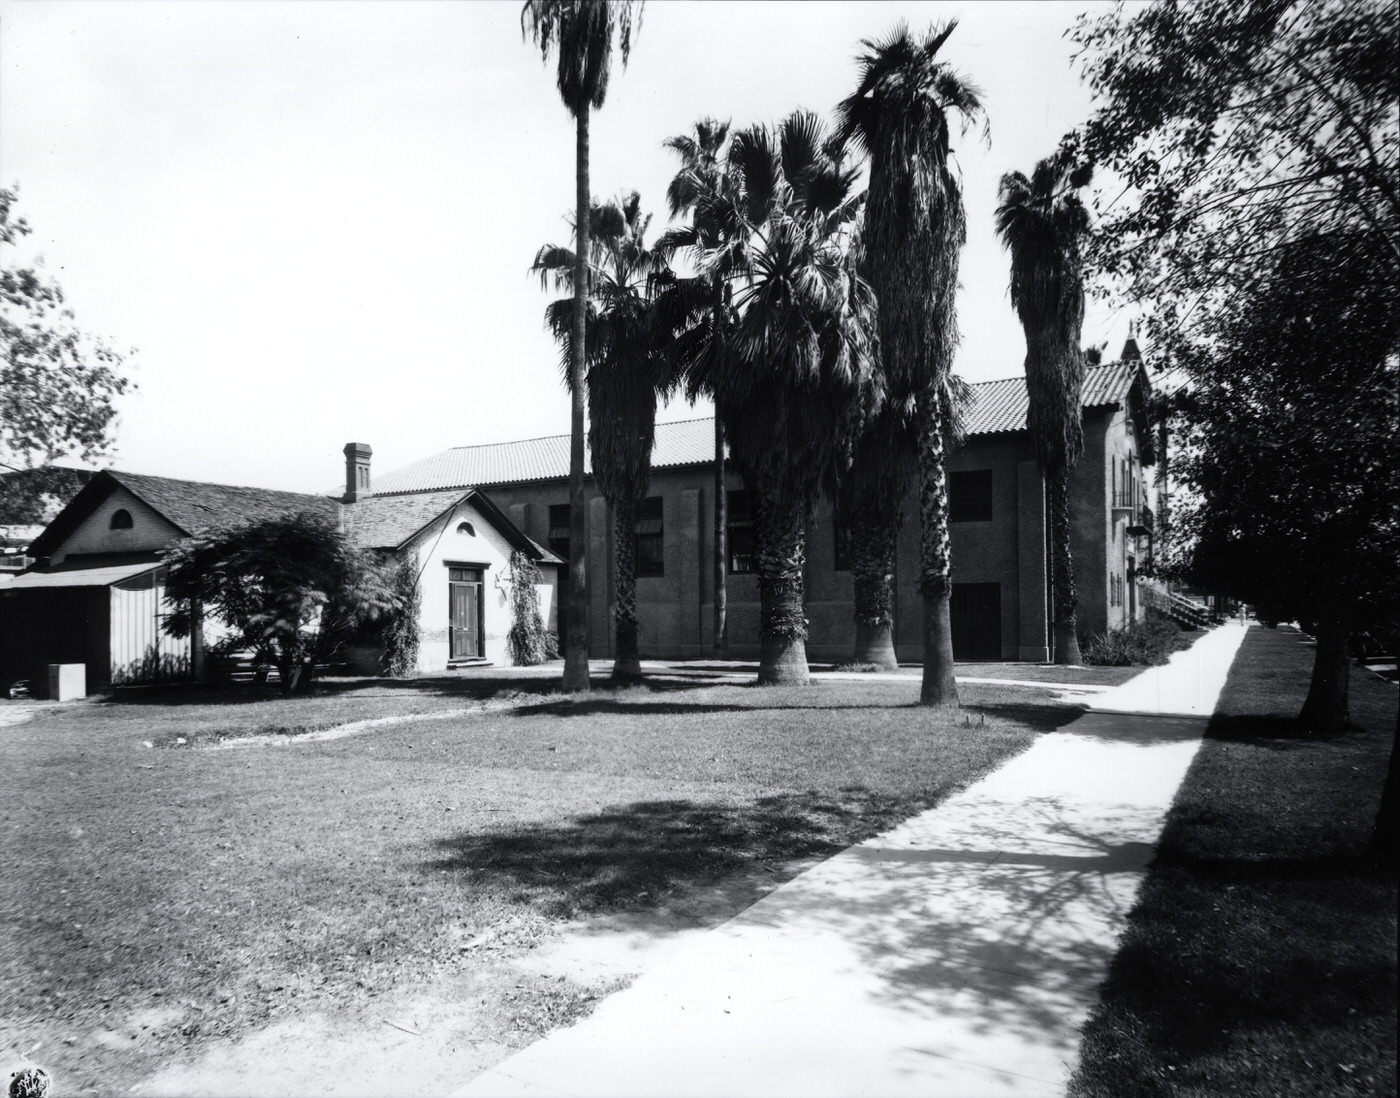 Y. W. C. A. Building Exterior and Grounds, 1927. This building stood at the intersection of Monroe St. and Second Ave. in Phoenix.